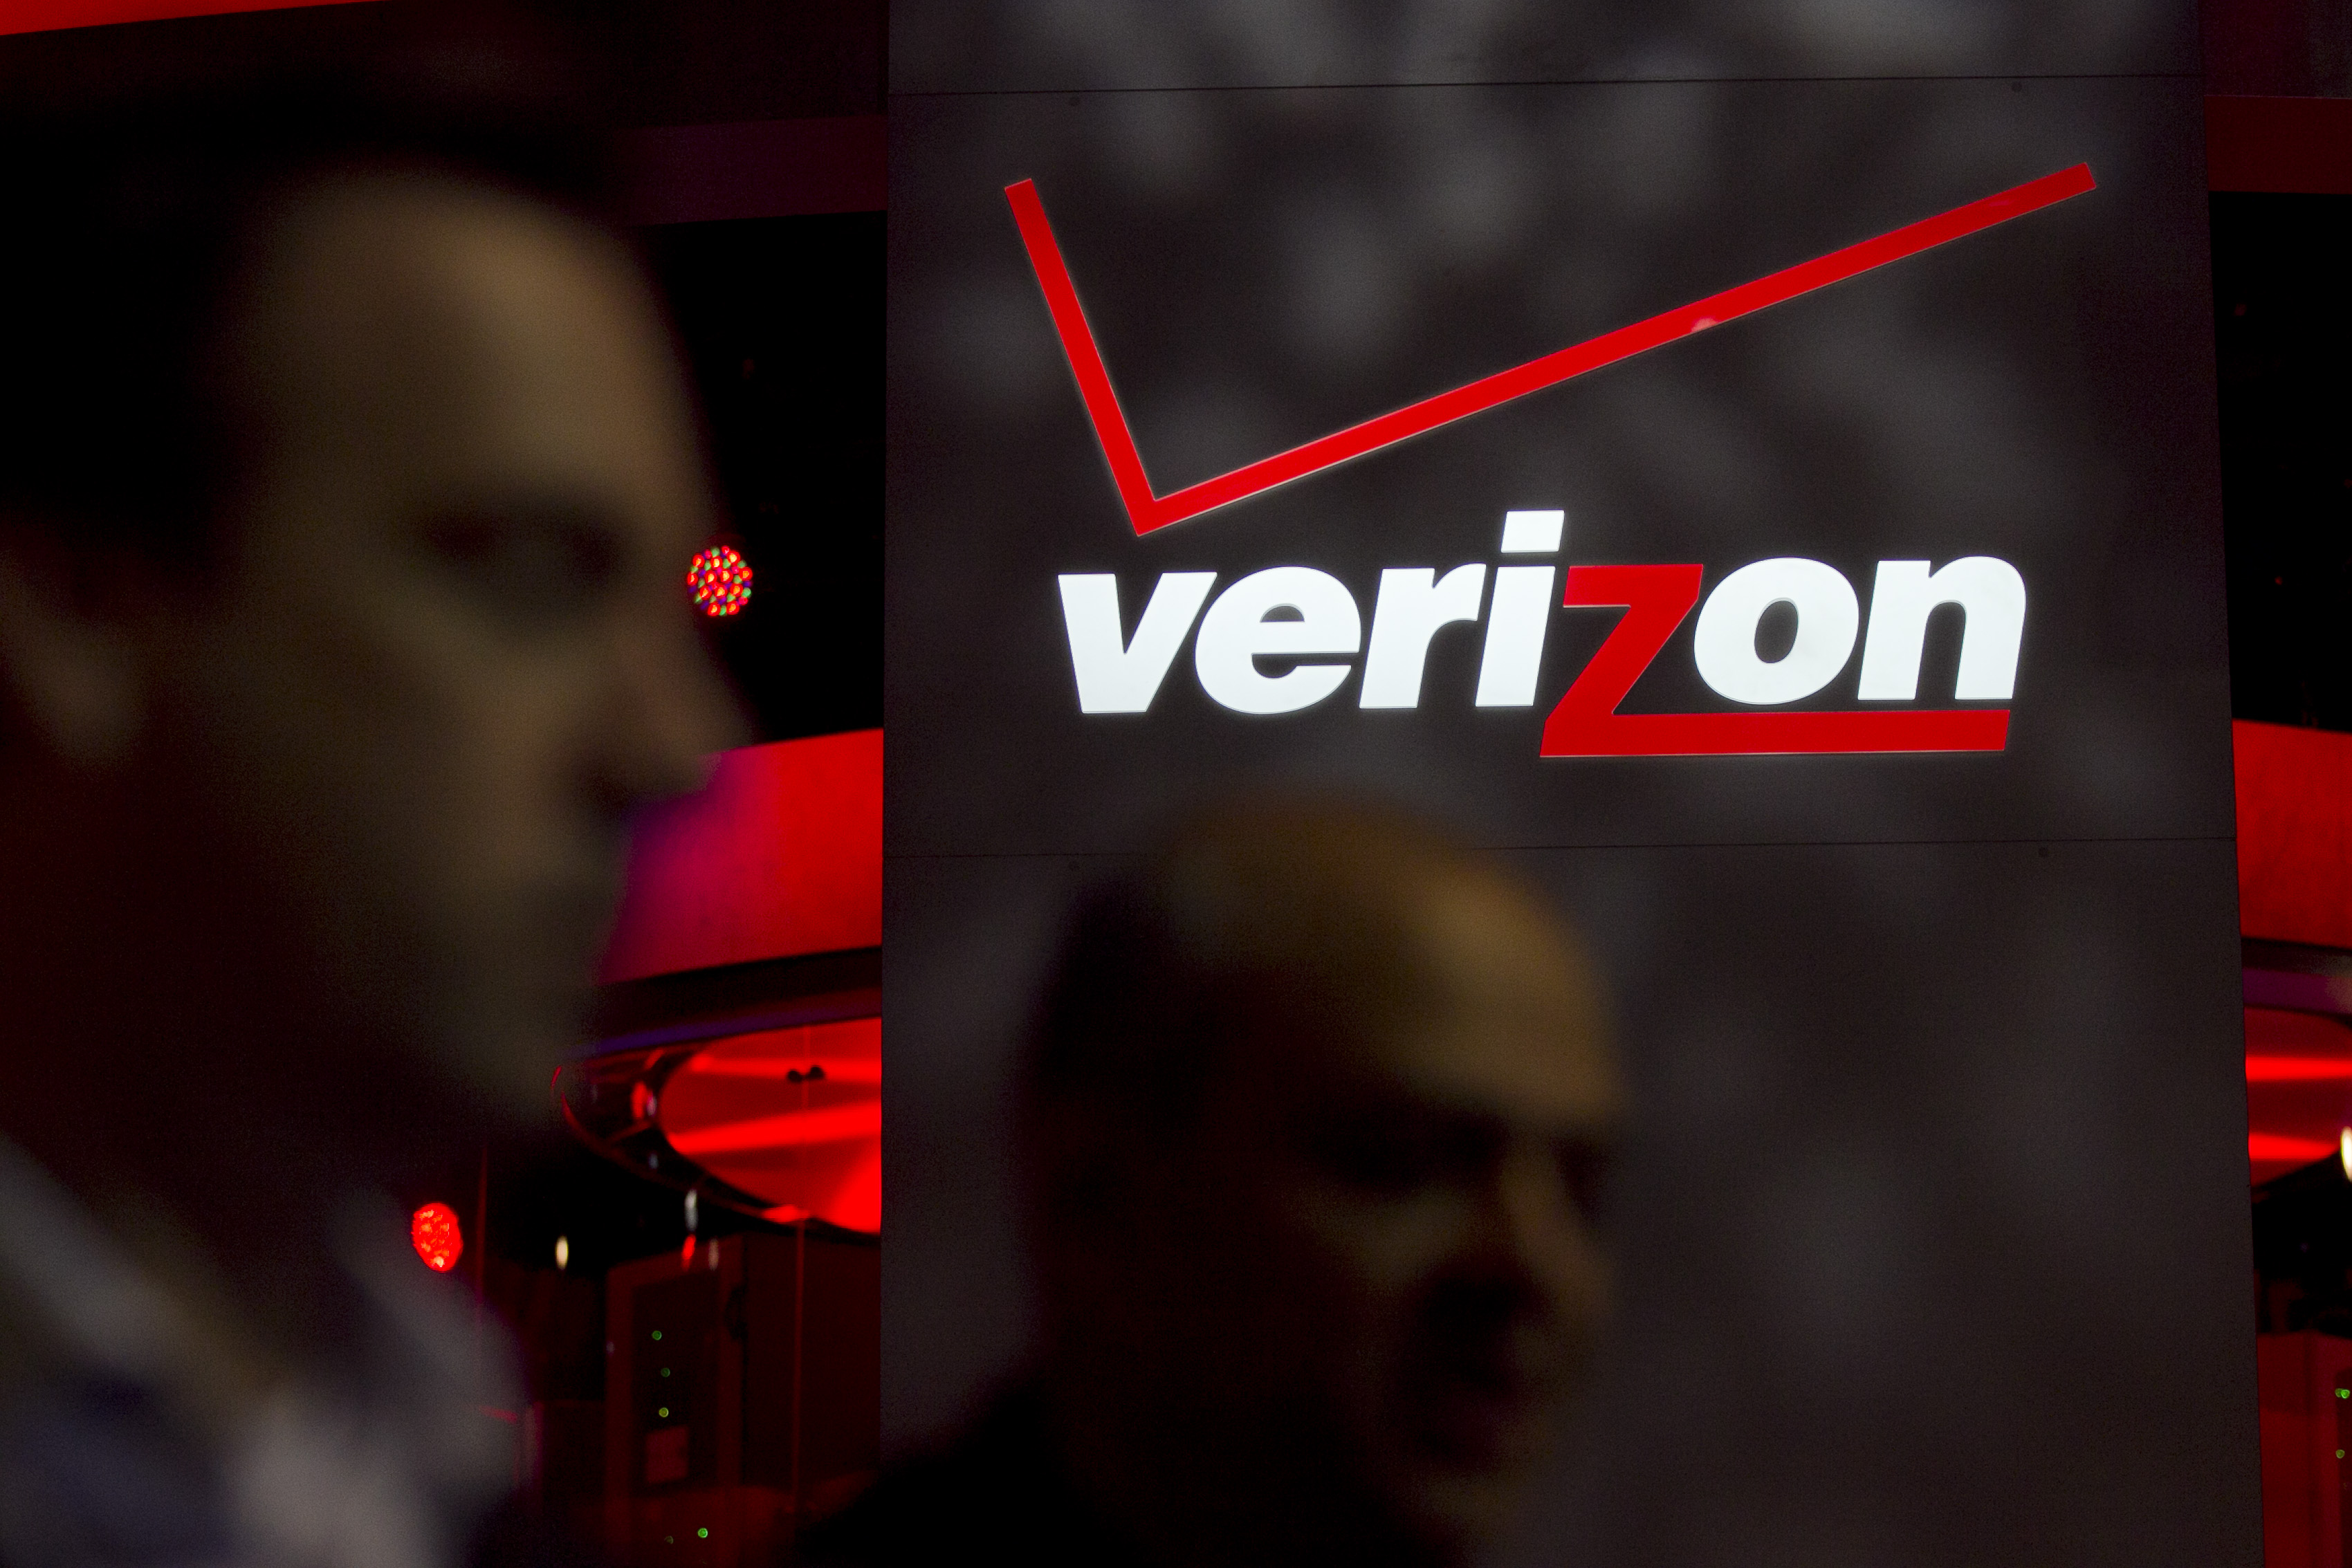 The Verizon Communications Inc. logo is seen at the International Consumer Electronics Show (CES) in Las Vegas, Nevada, U.S., on Thursday, Jan. 12, 2012. (Bloomberg&mdash;Bloomberg via Getty Images)